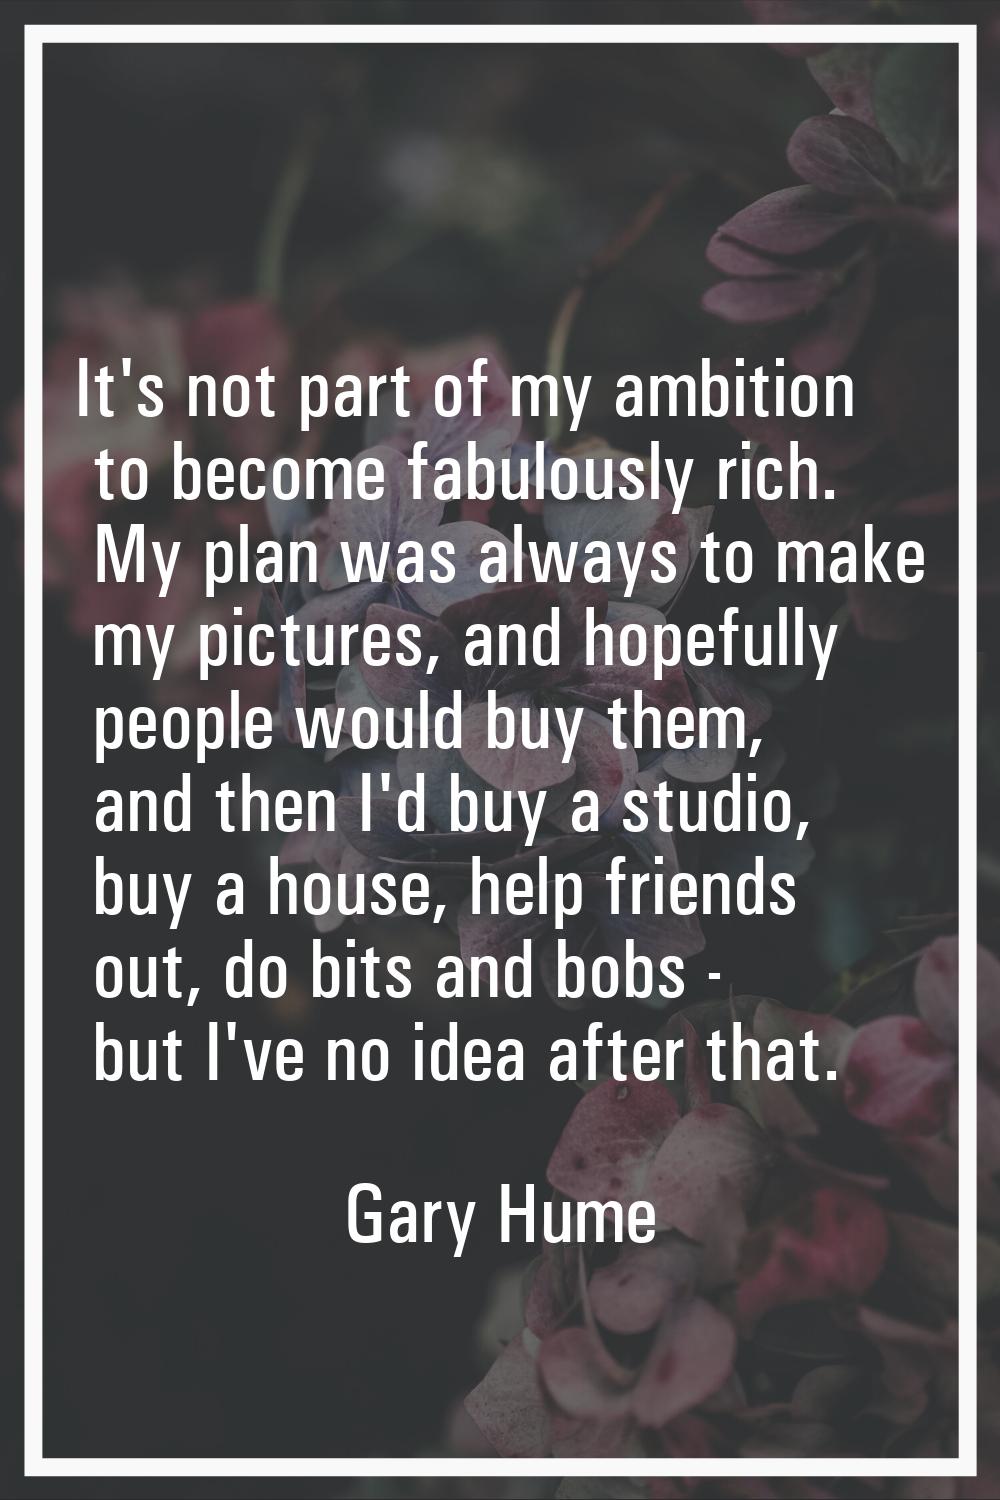 It's not part of my ambition to become fabulously rich. My plan was always to make my pictures, and